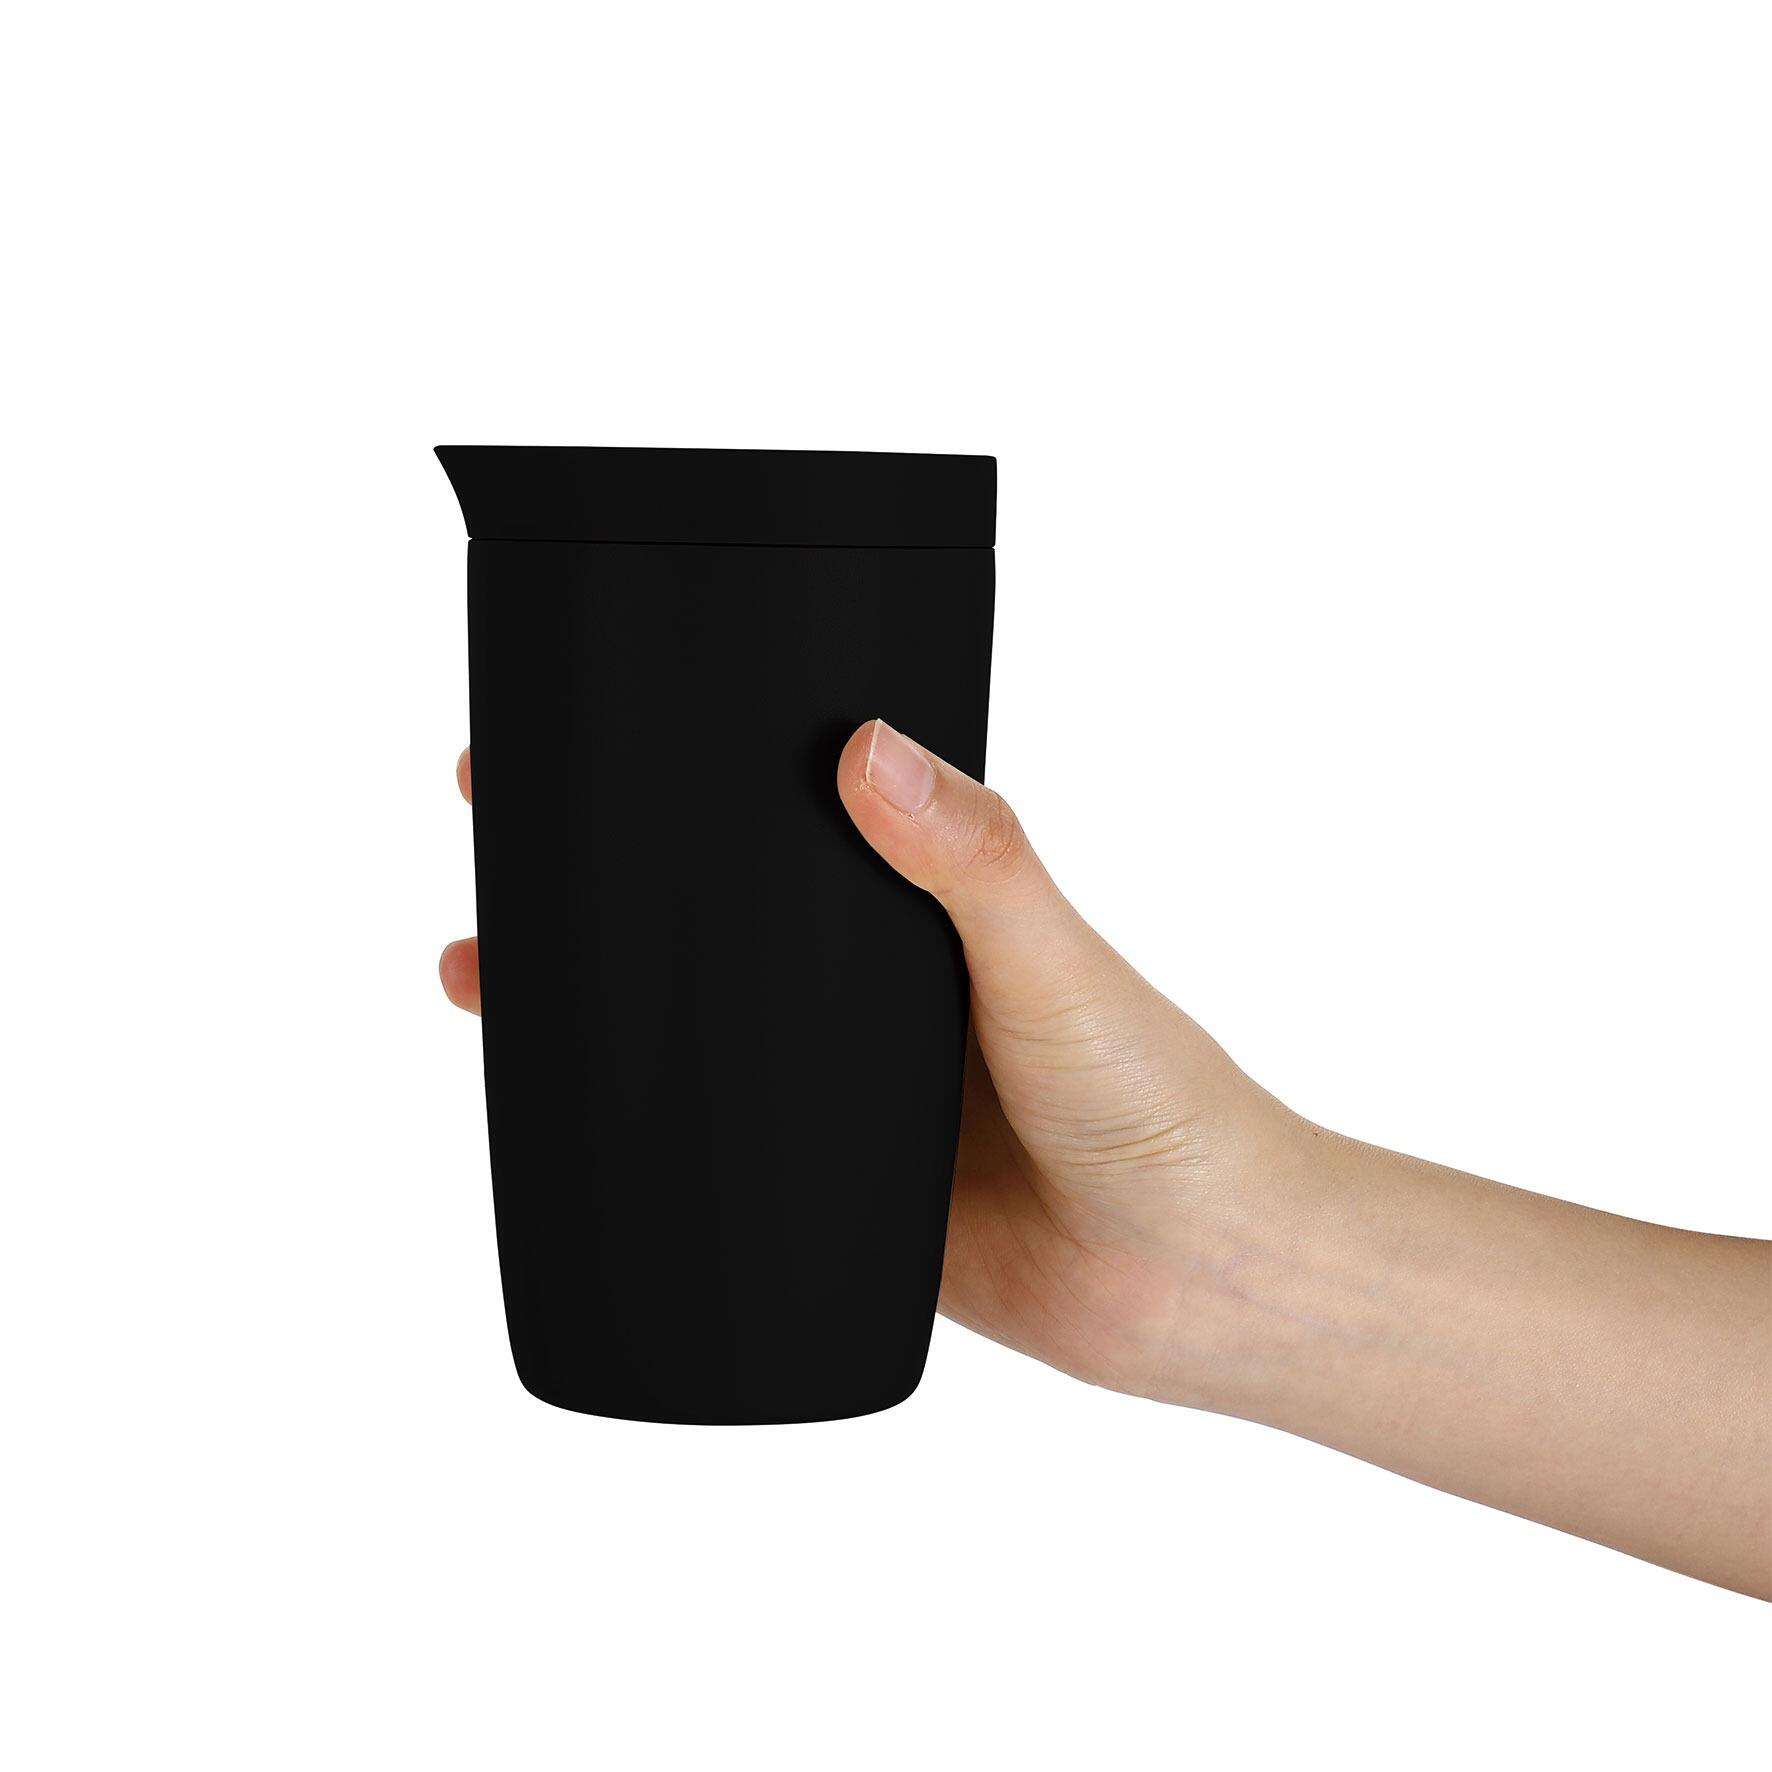 Radius Leakproof Double Wall Stainless Steel Travel Cup - Black